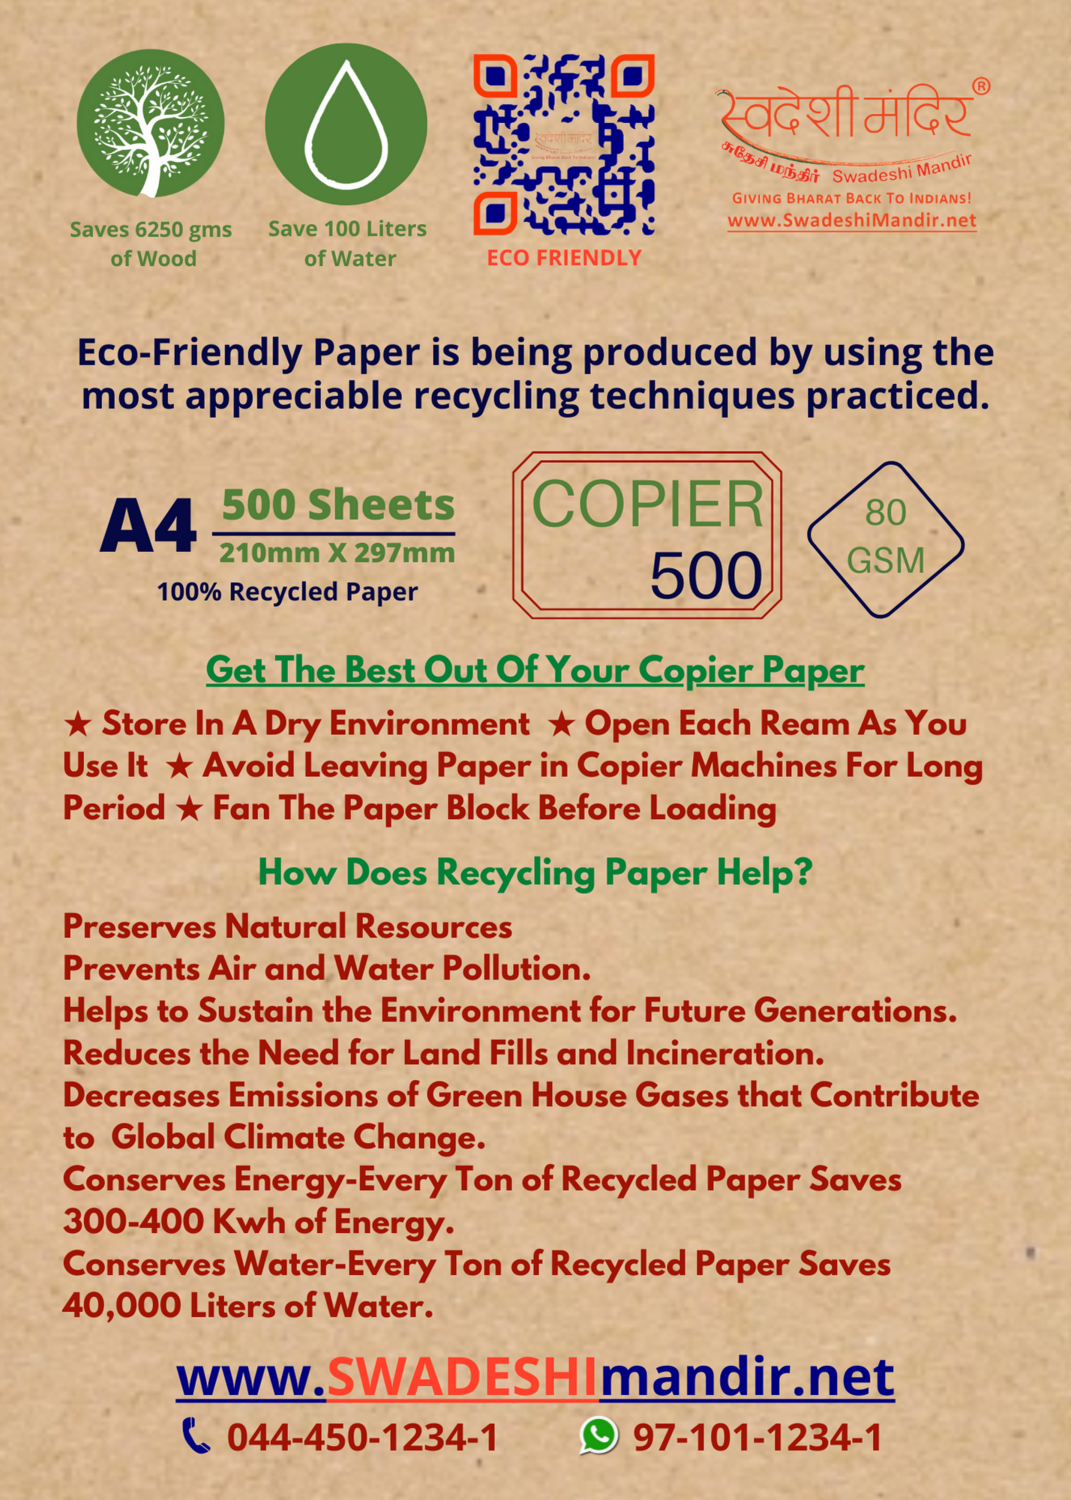 100% Recycled Copier Paper (Unbleached & Eco-friendly) - A4, A5 Sizes (Greyish color) & A4 (Whitish Color - Bleached)